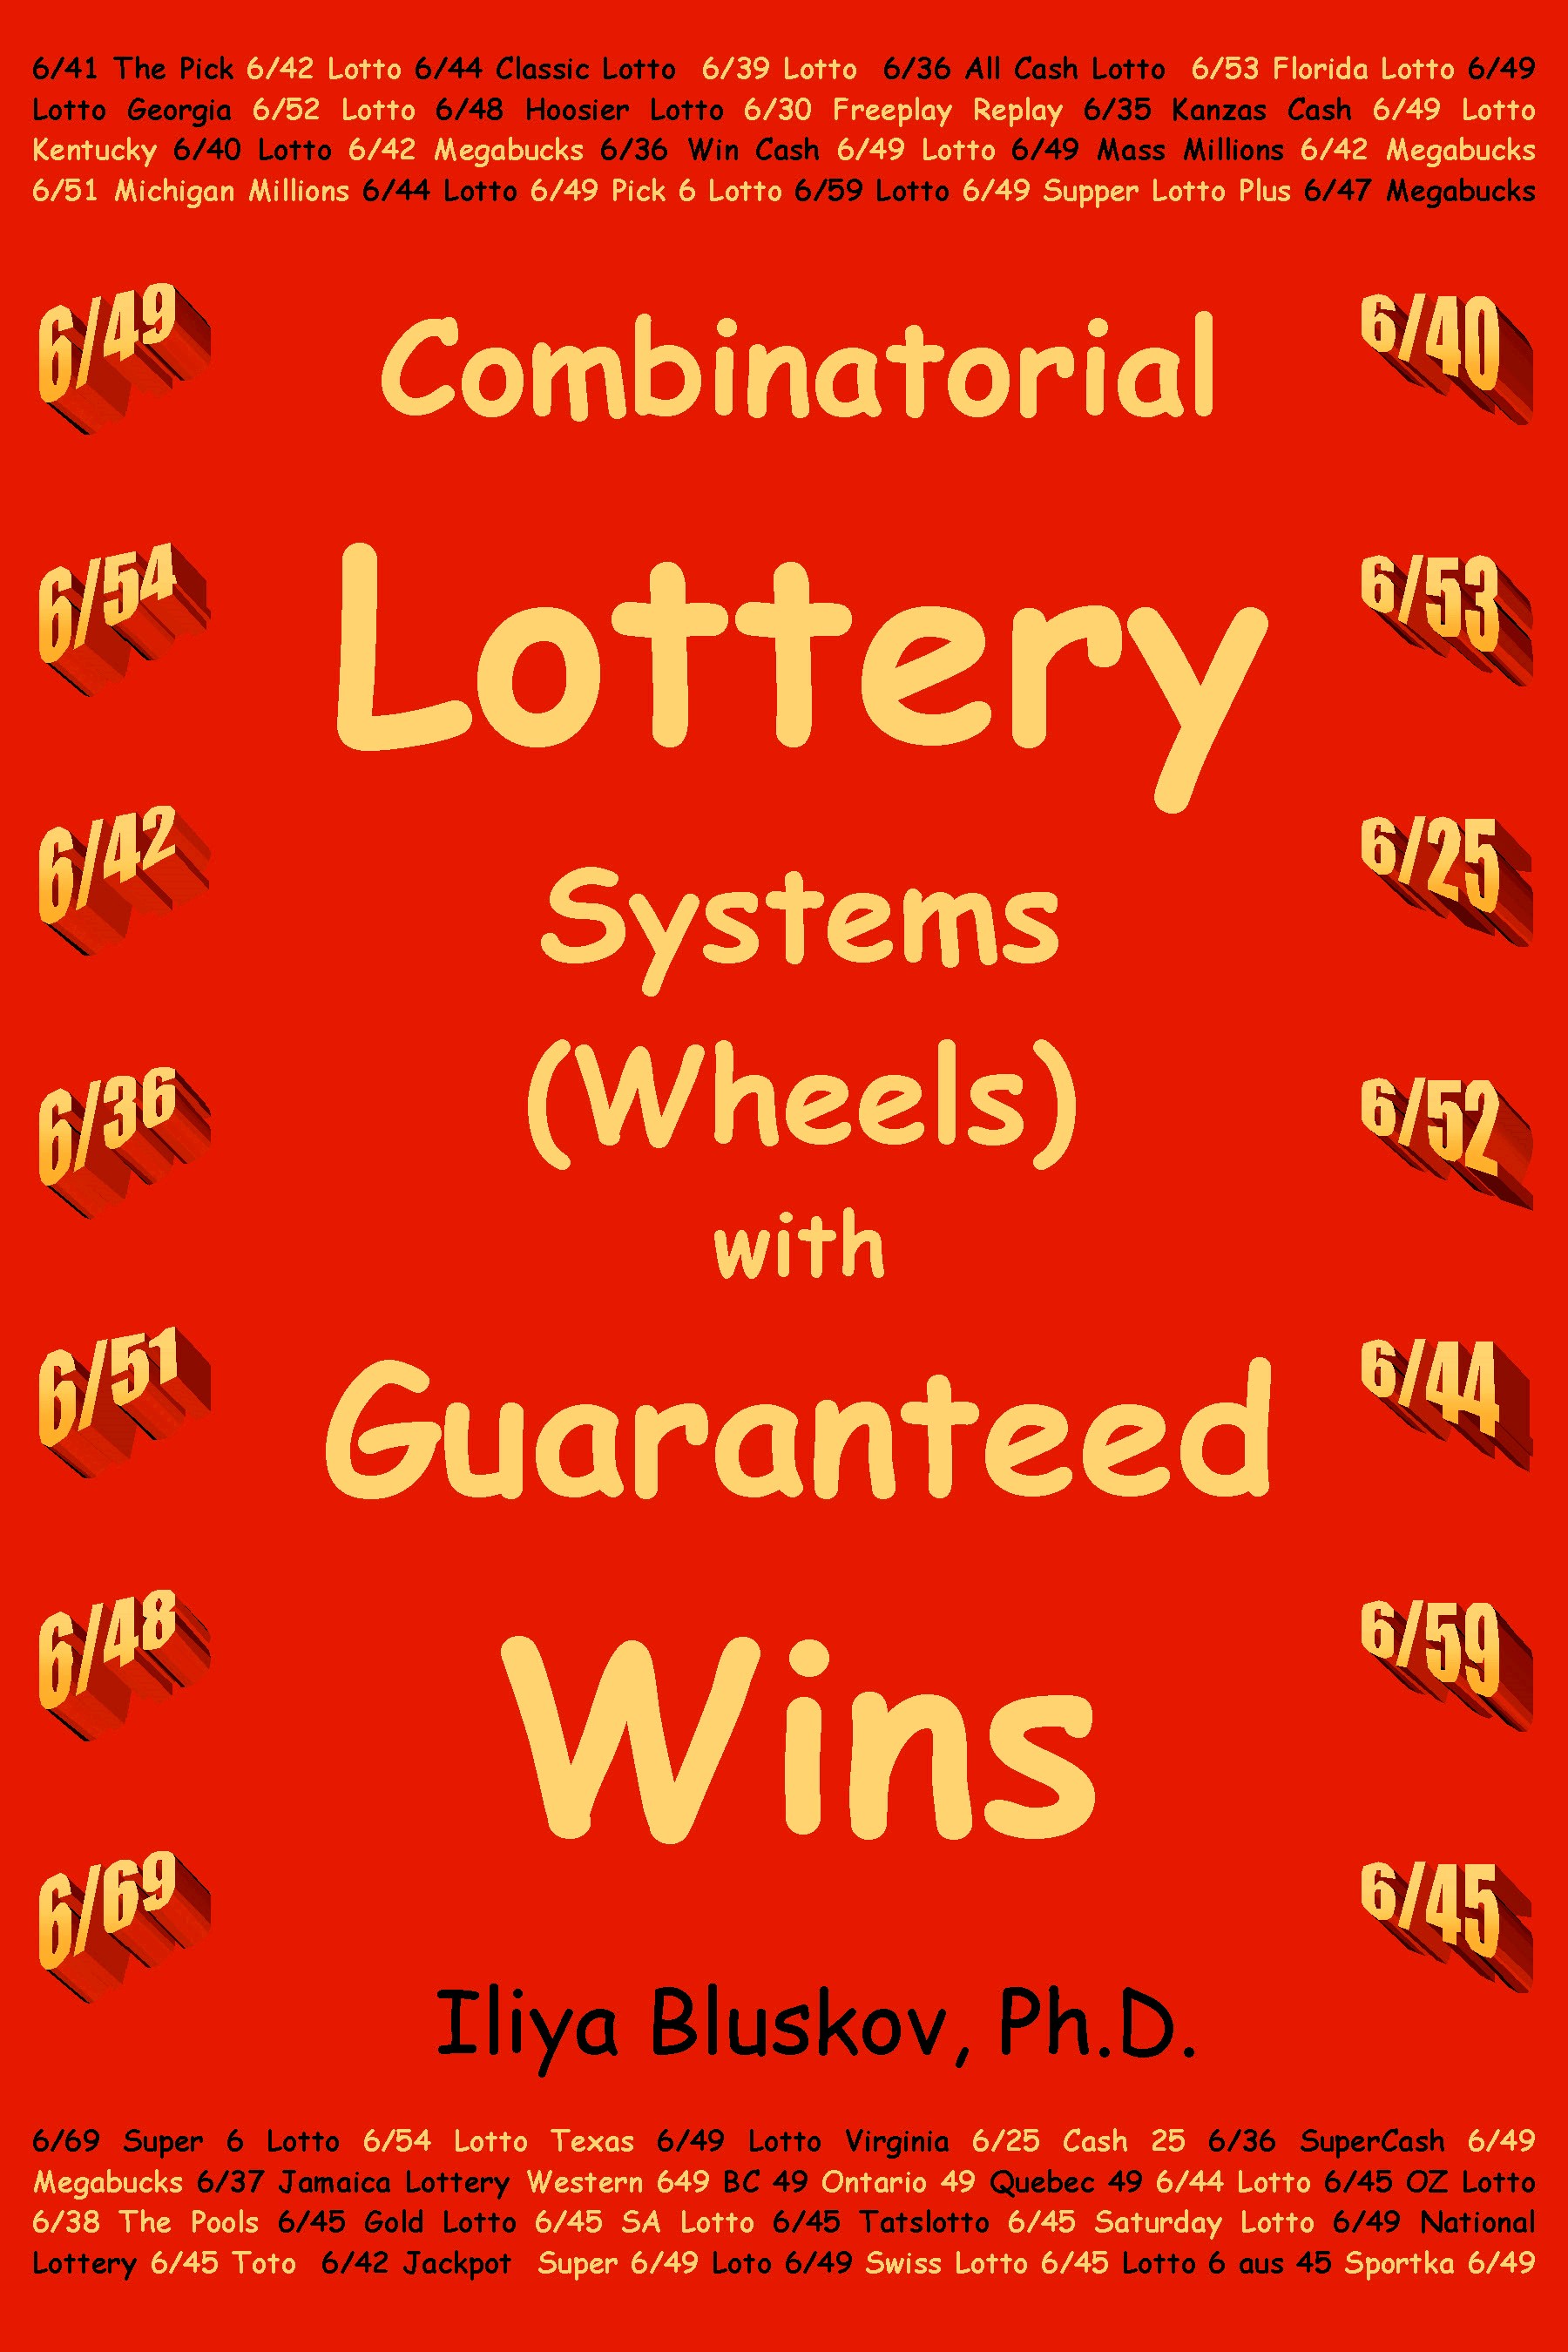 Finally An Automated Pick 6 Lotto/Lottery System That's Guaranteed to Win 